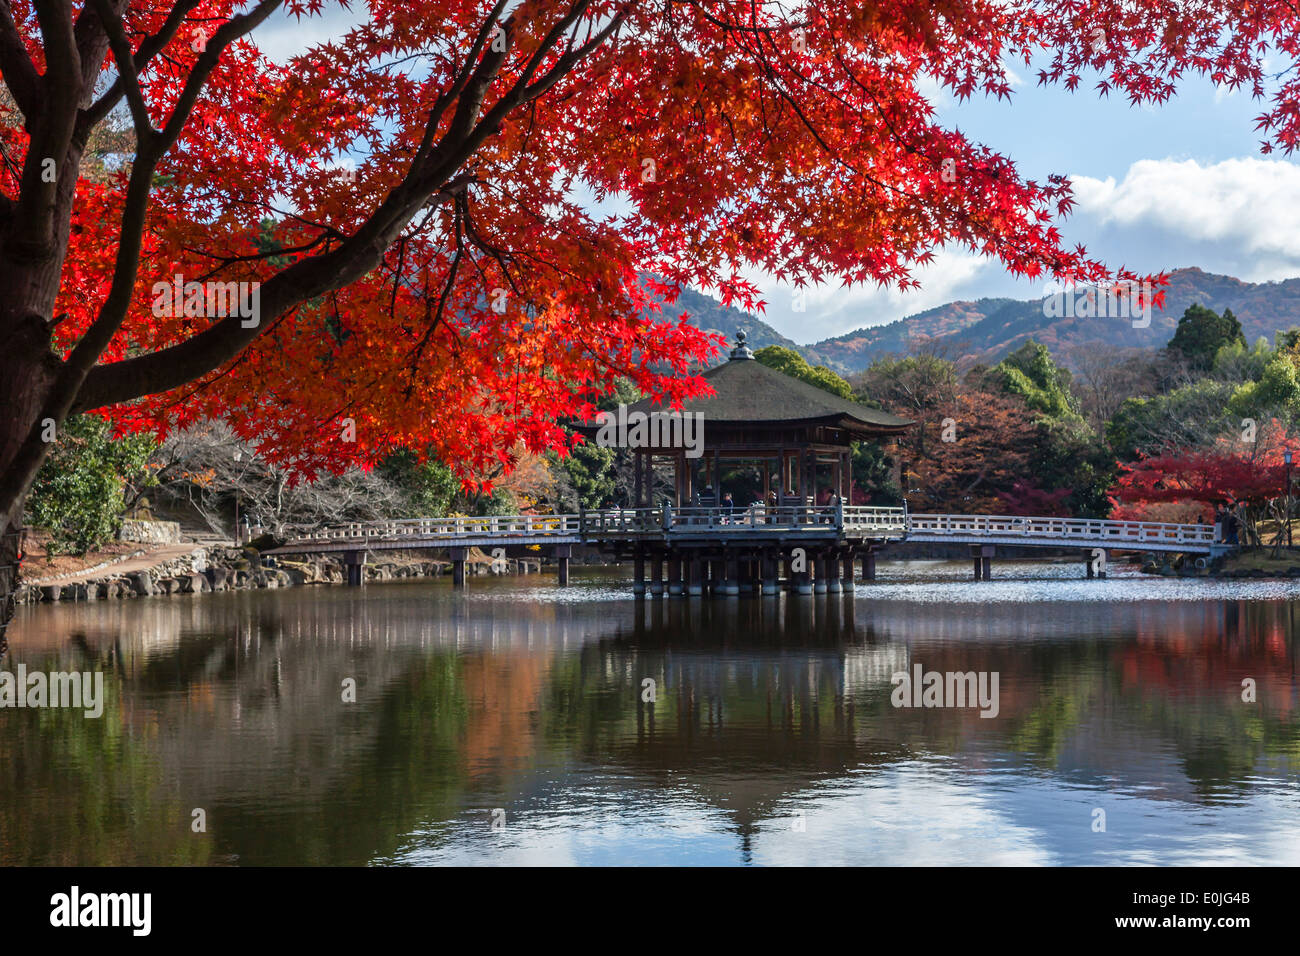 Japanese garden and autumn leaves in Japan Stock Photo